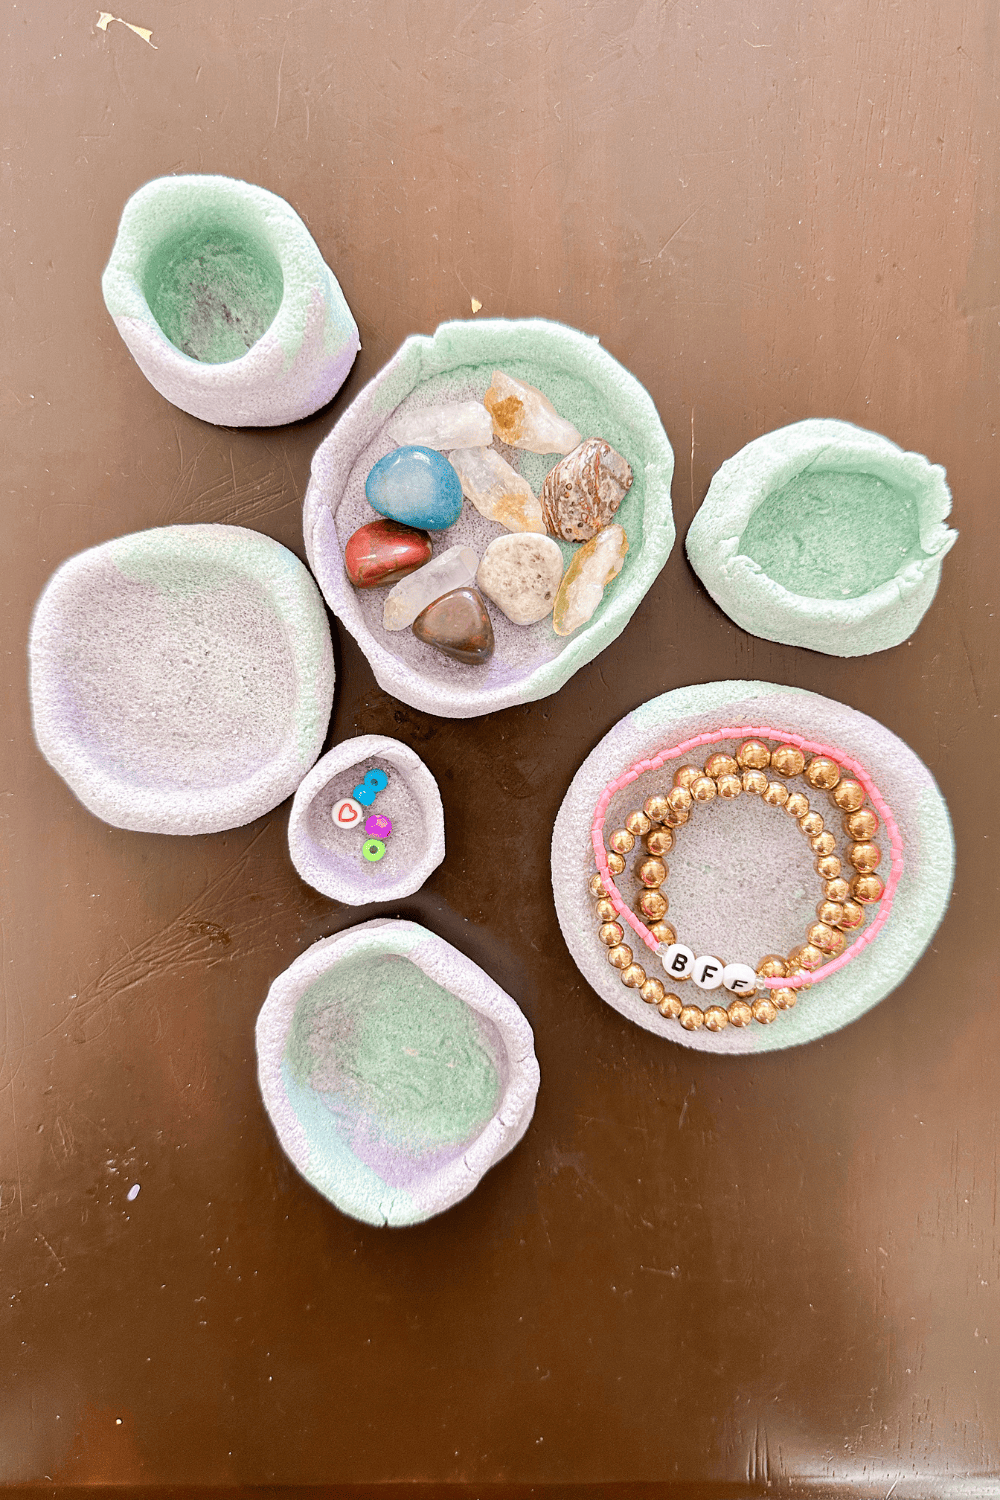 multiple two-tone blue and purple salt dough bowls. Some empty, one holding rocks, another holding bracelets.